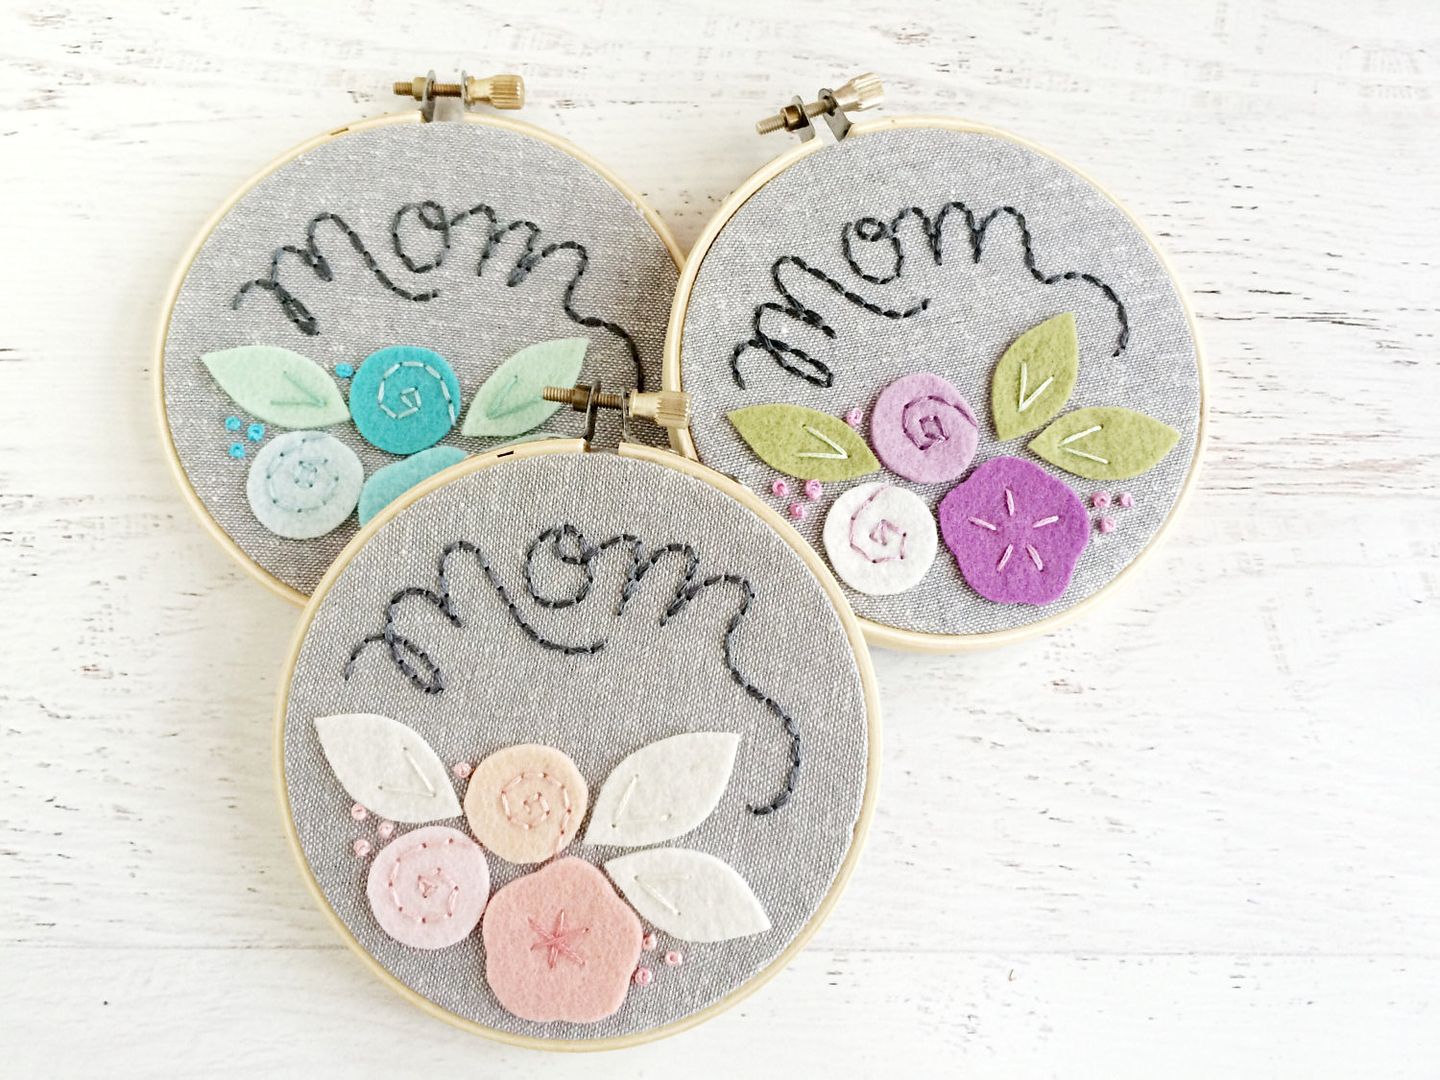 Mom embroidery hoop art from Blue Without You Kids: Mother's Day gifts supporting indie women makers